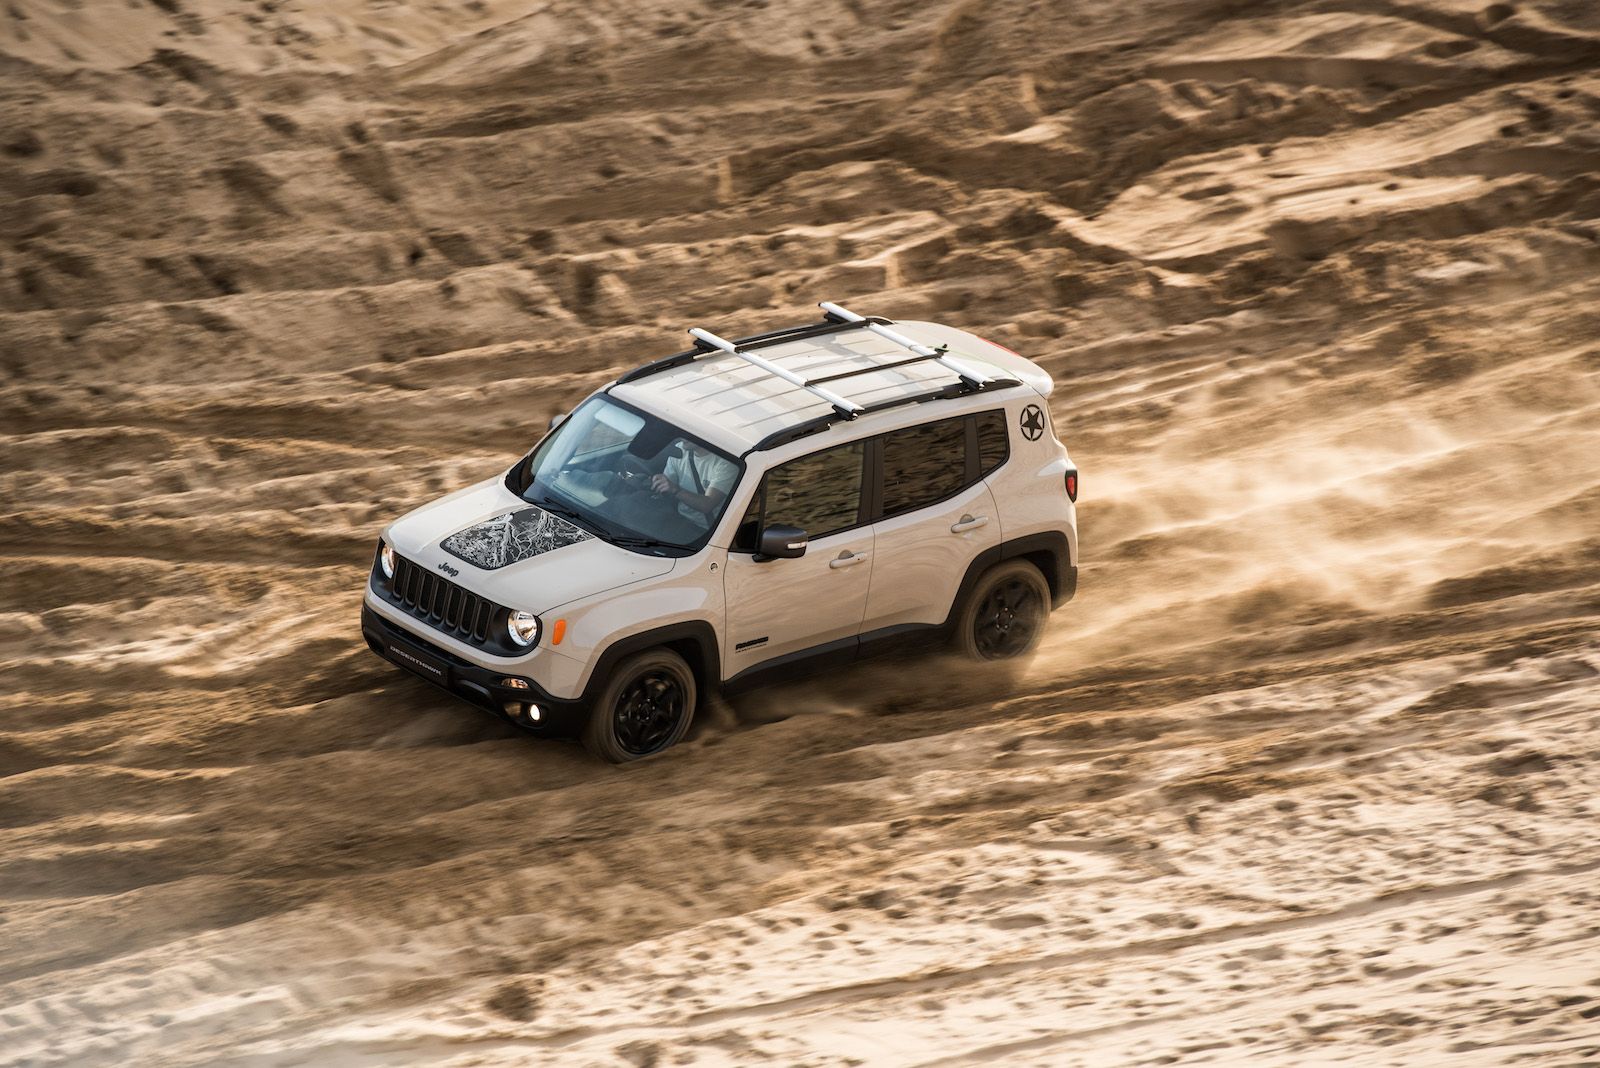 jeep launches renegade desert hawk suv limited to 100 models in the uk image 1